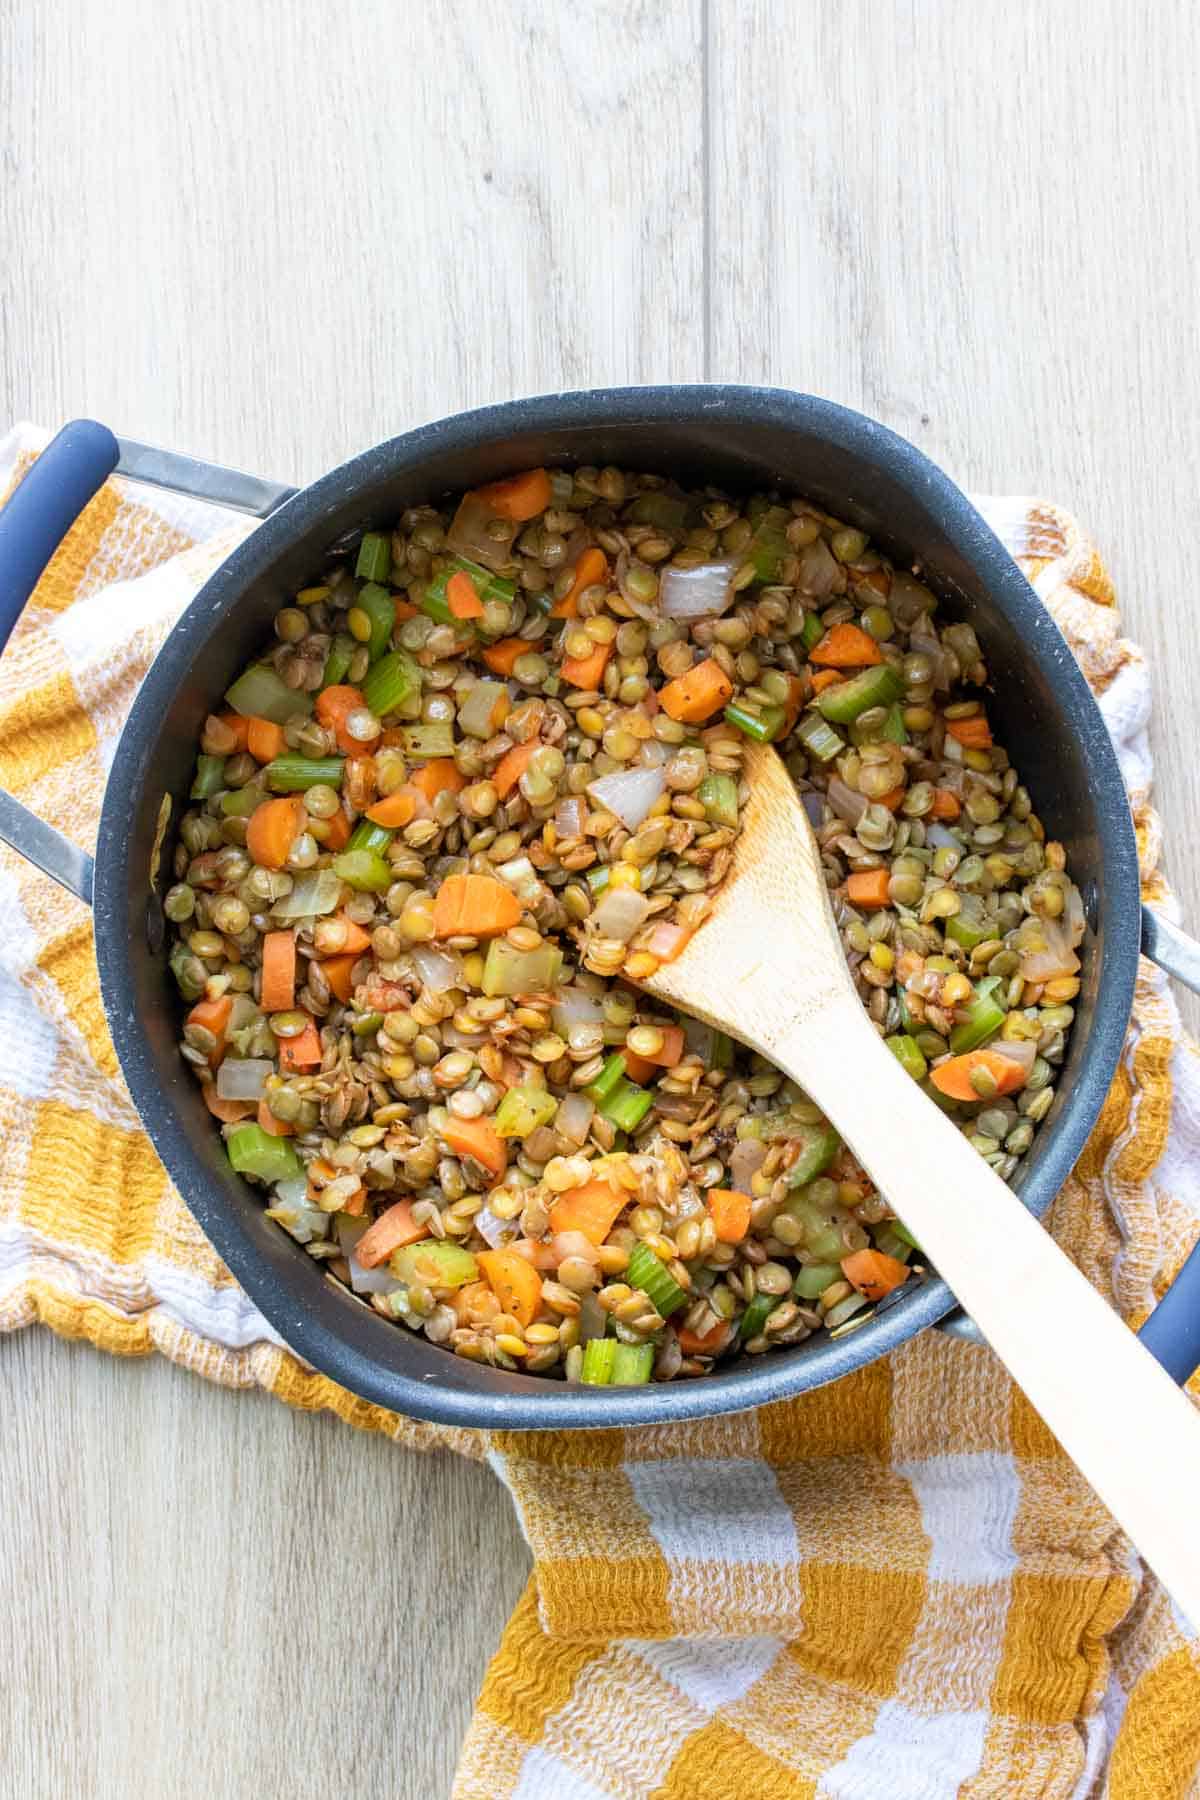 A big pot with lentils, carrots, celery and onion being sauteed